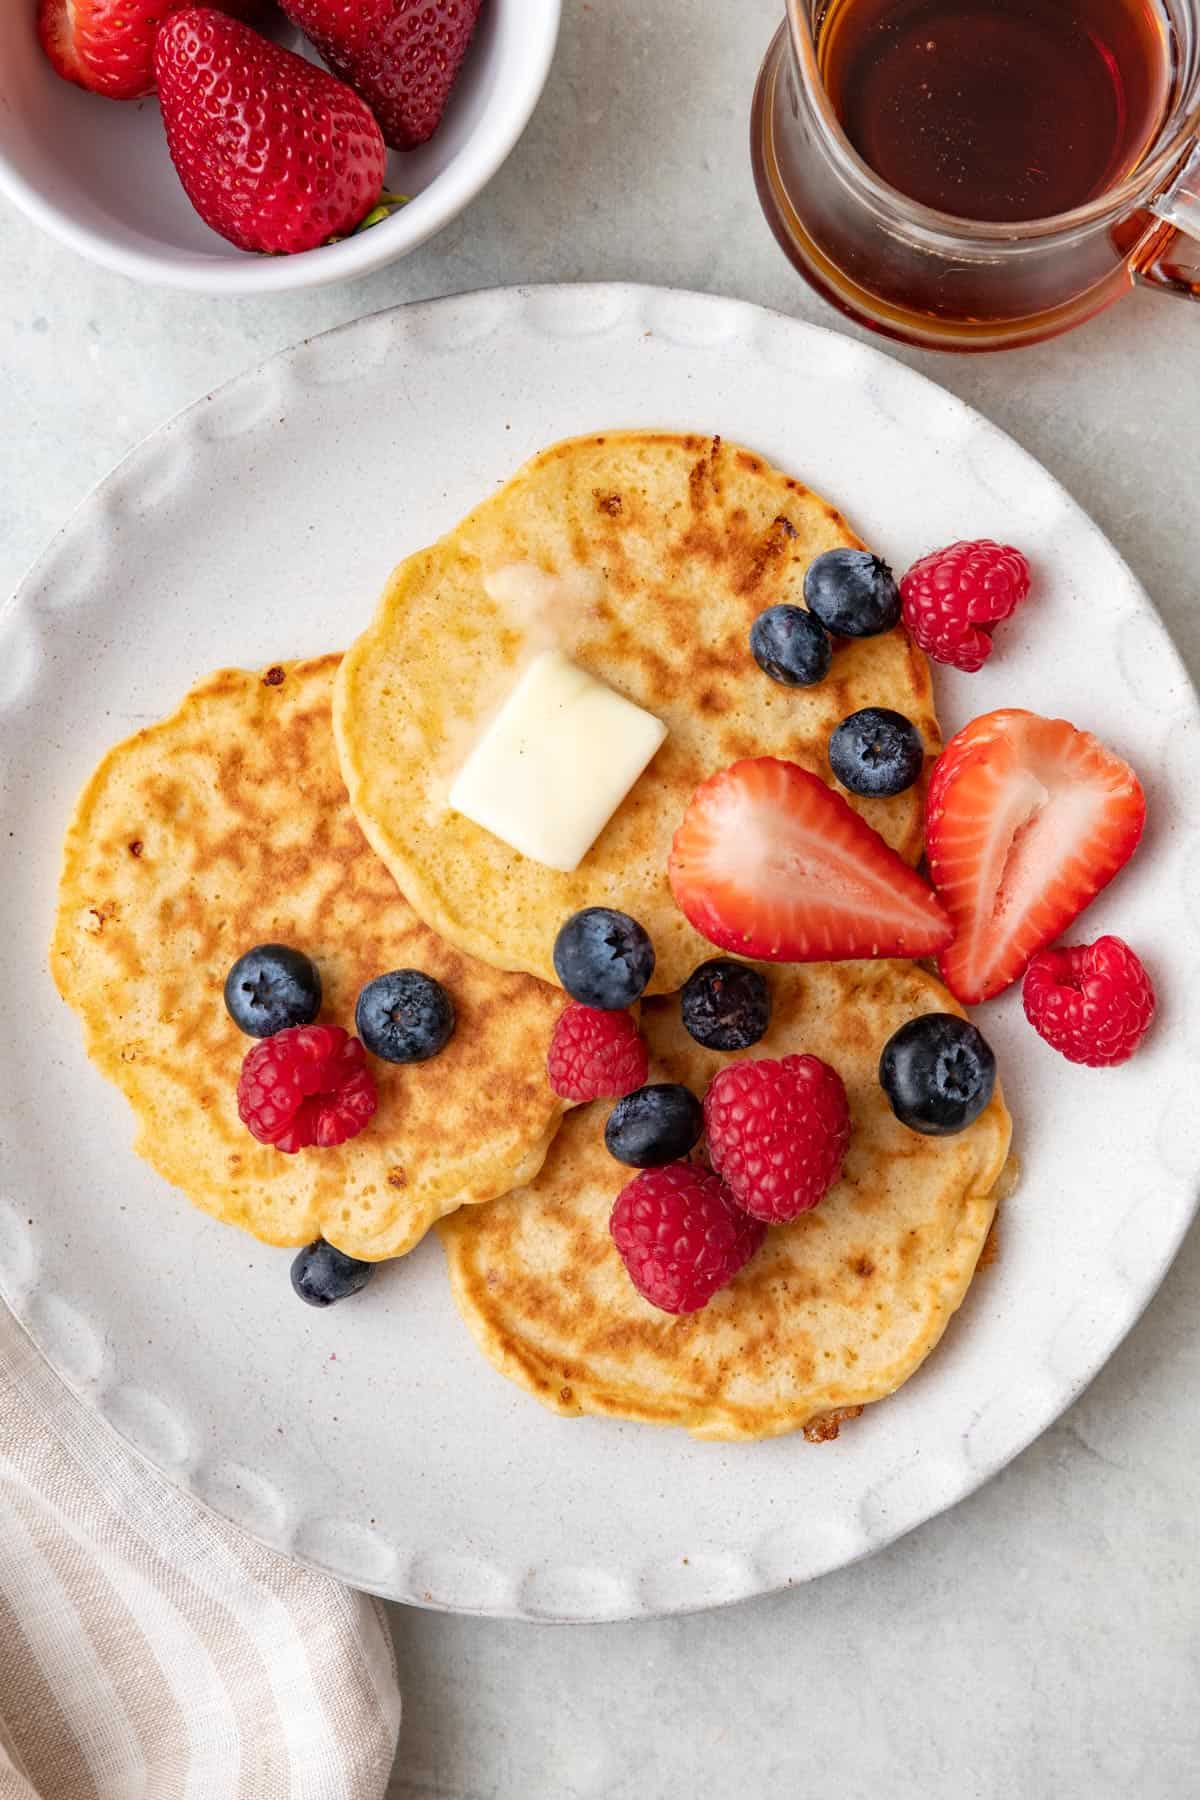 Three cottage cheese pancakes on a plate topped with a pat of butter and fresh berries with maple syrup and more fresh fruit nearby.